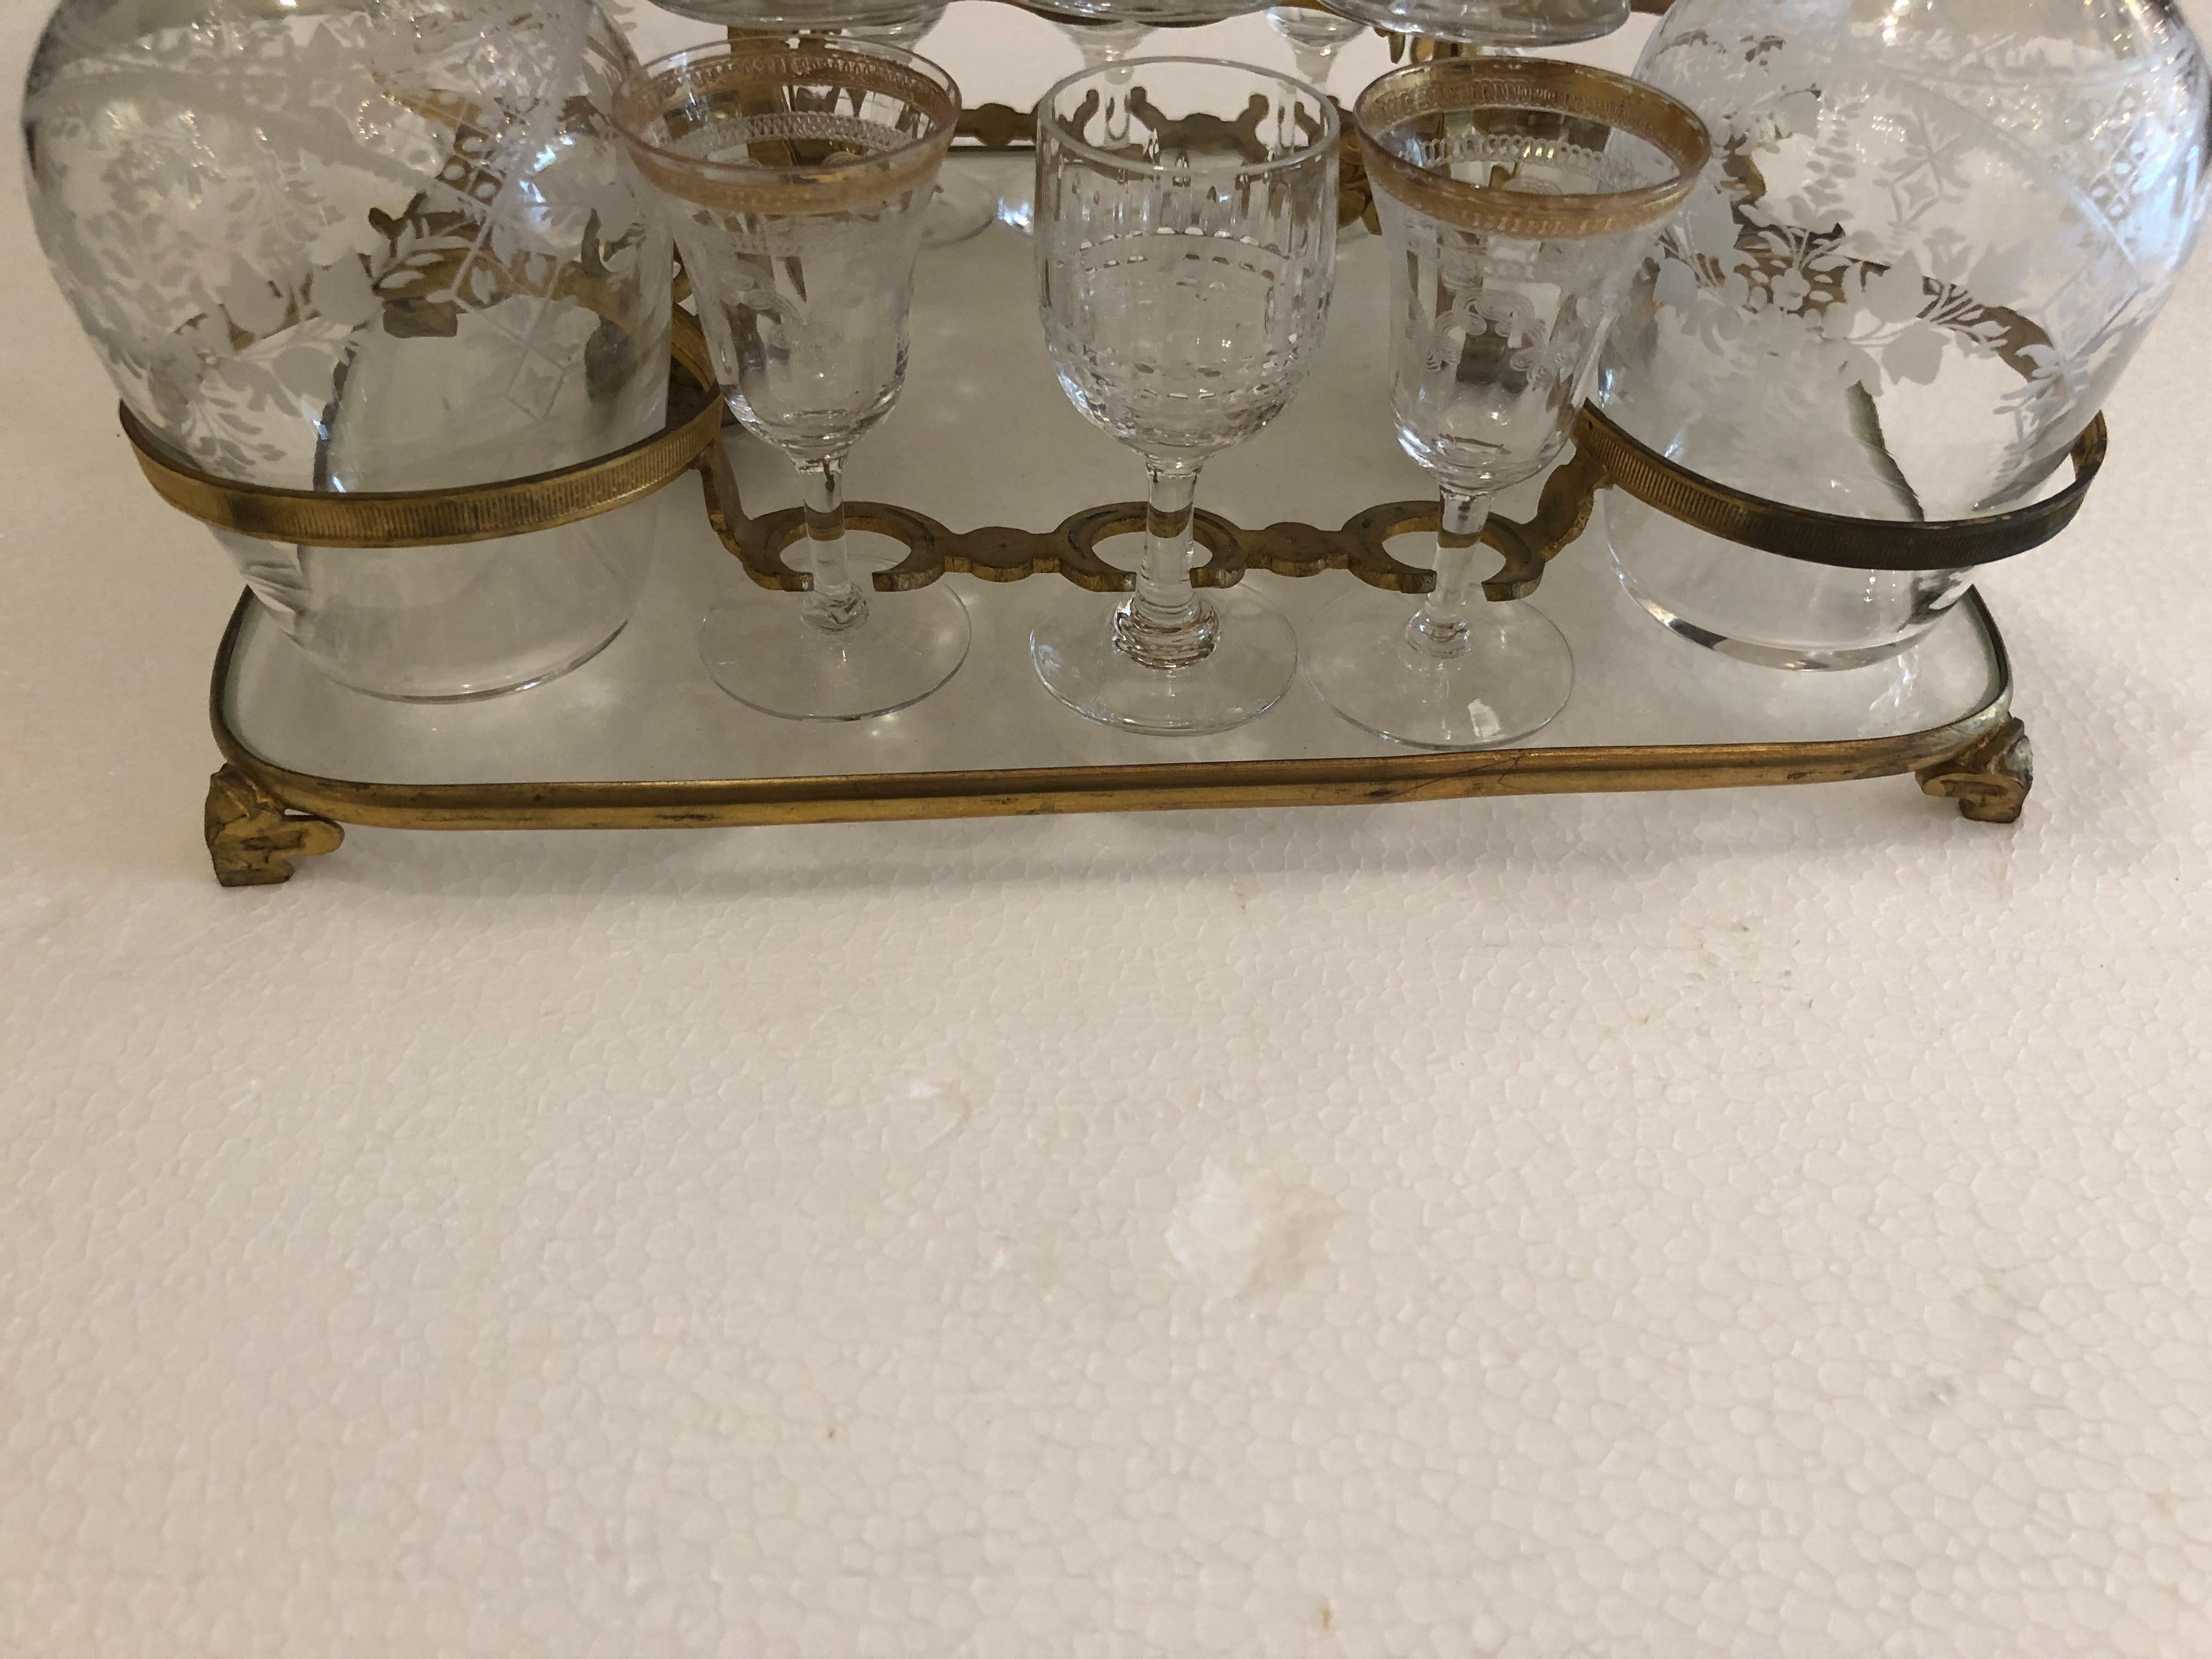 Tantalus Set with Baccarat Glasses In Good Condition For Sale In Dallas, TX